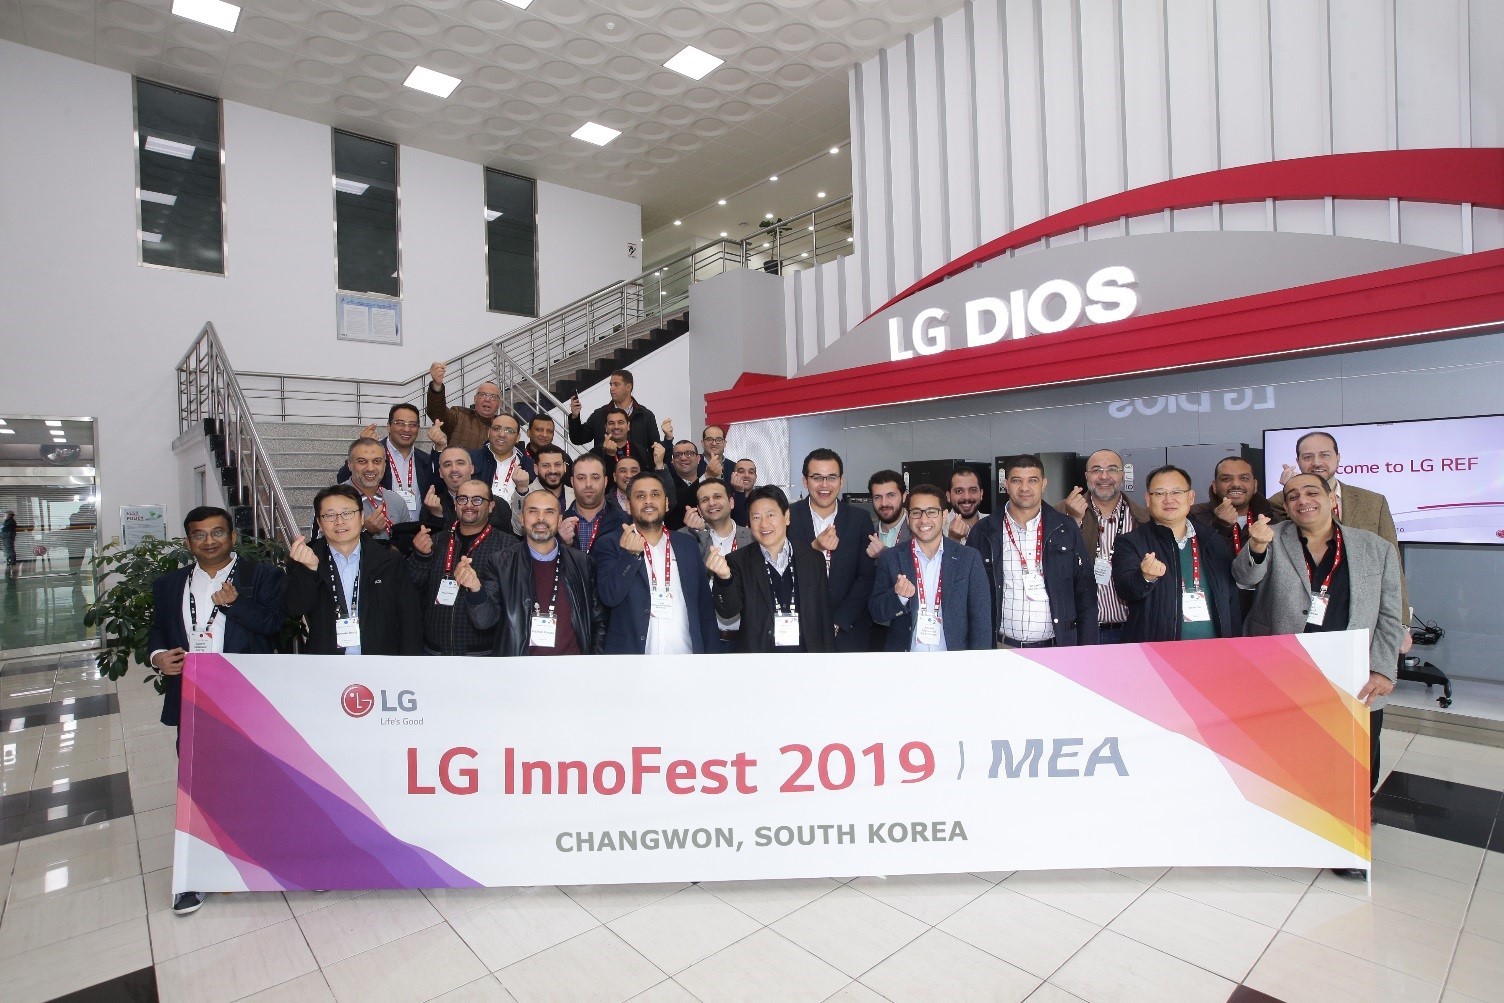 A group photo of attendees standing behind the wide LG InnoFest 2019 MEA banner